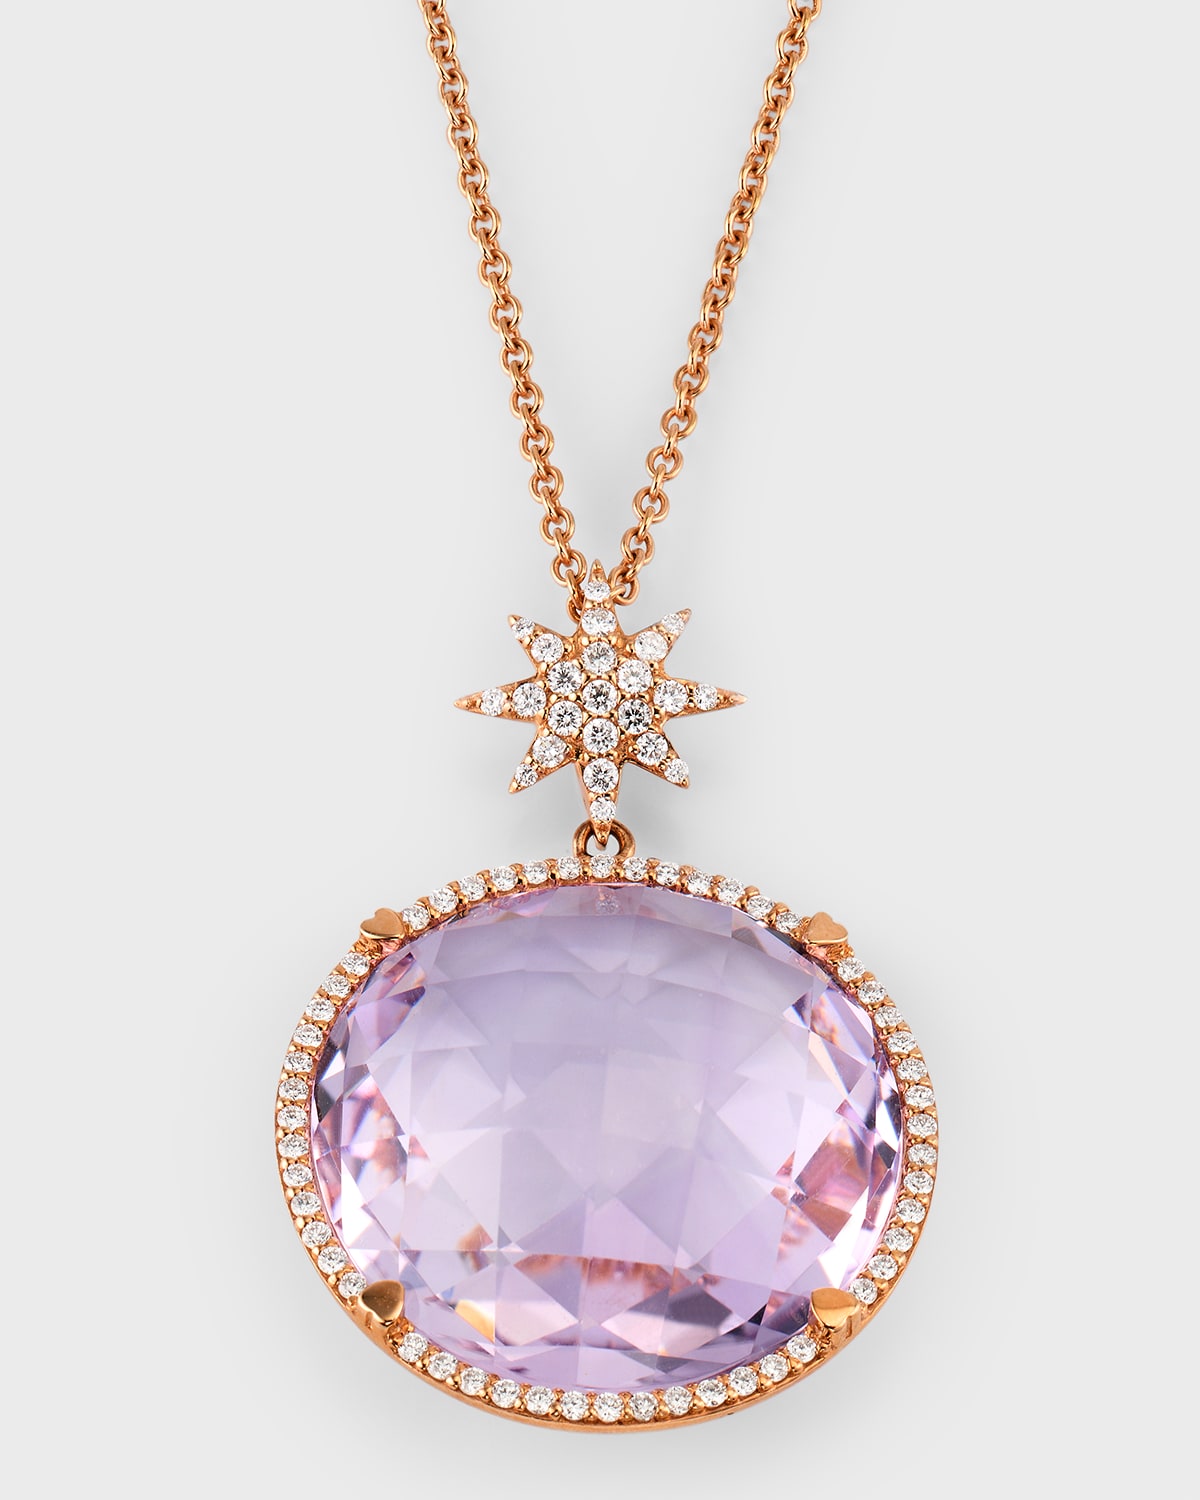 Lisa Nik 18k Rose Gold Amethyst And Diamond Pendant Necklace With Star Bail